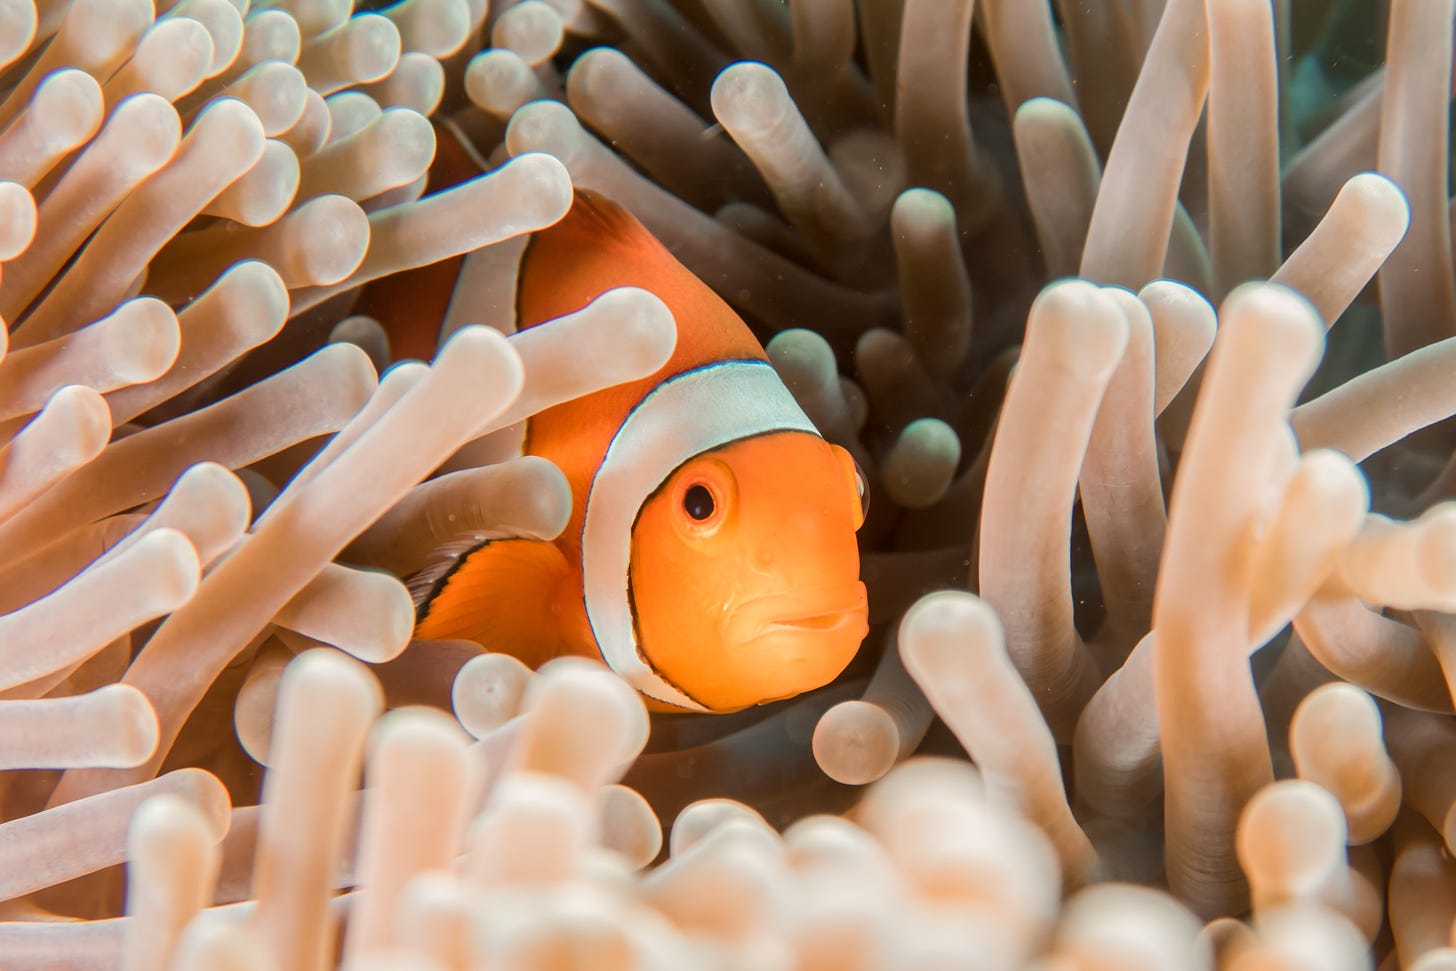 An orange and white-striped clownfish peeking out from behind aquatic plants